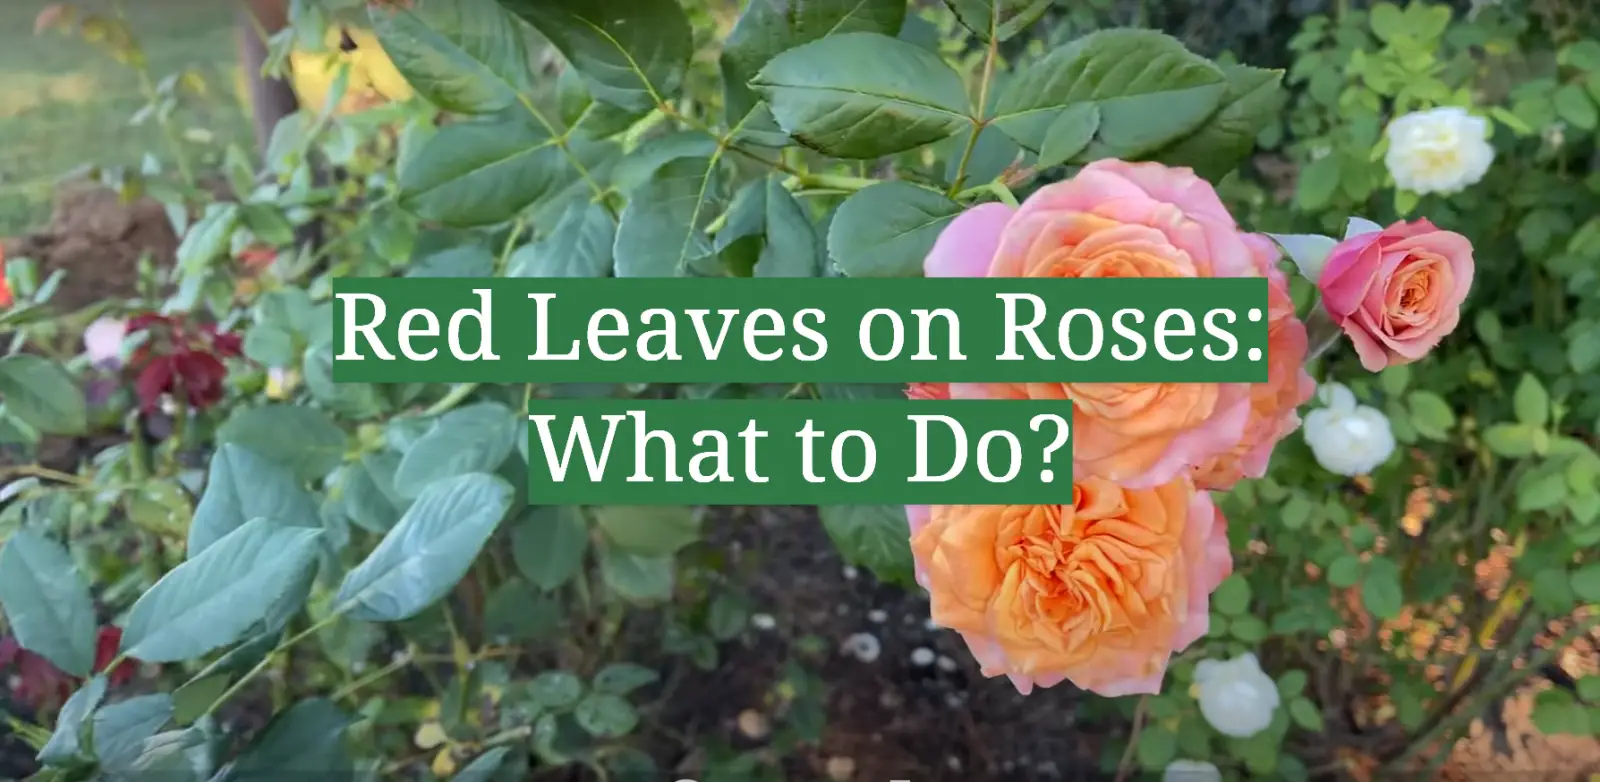 Red Leaves on Roses: What to Do?